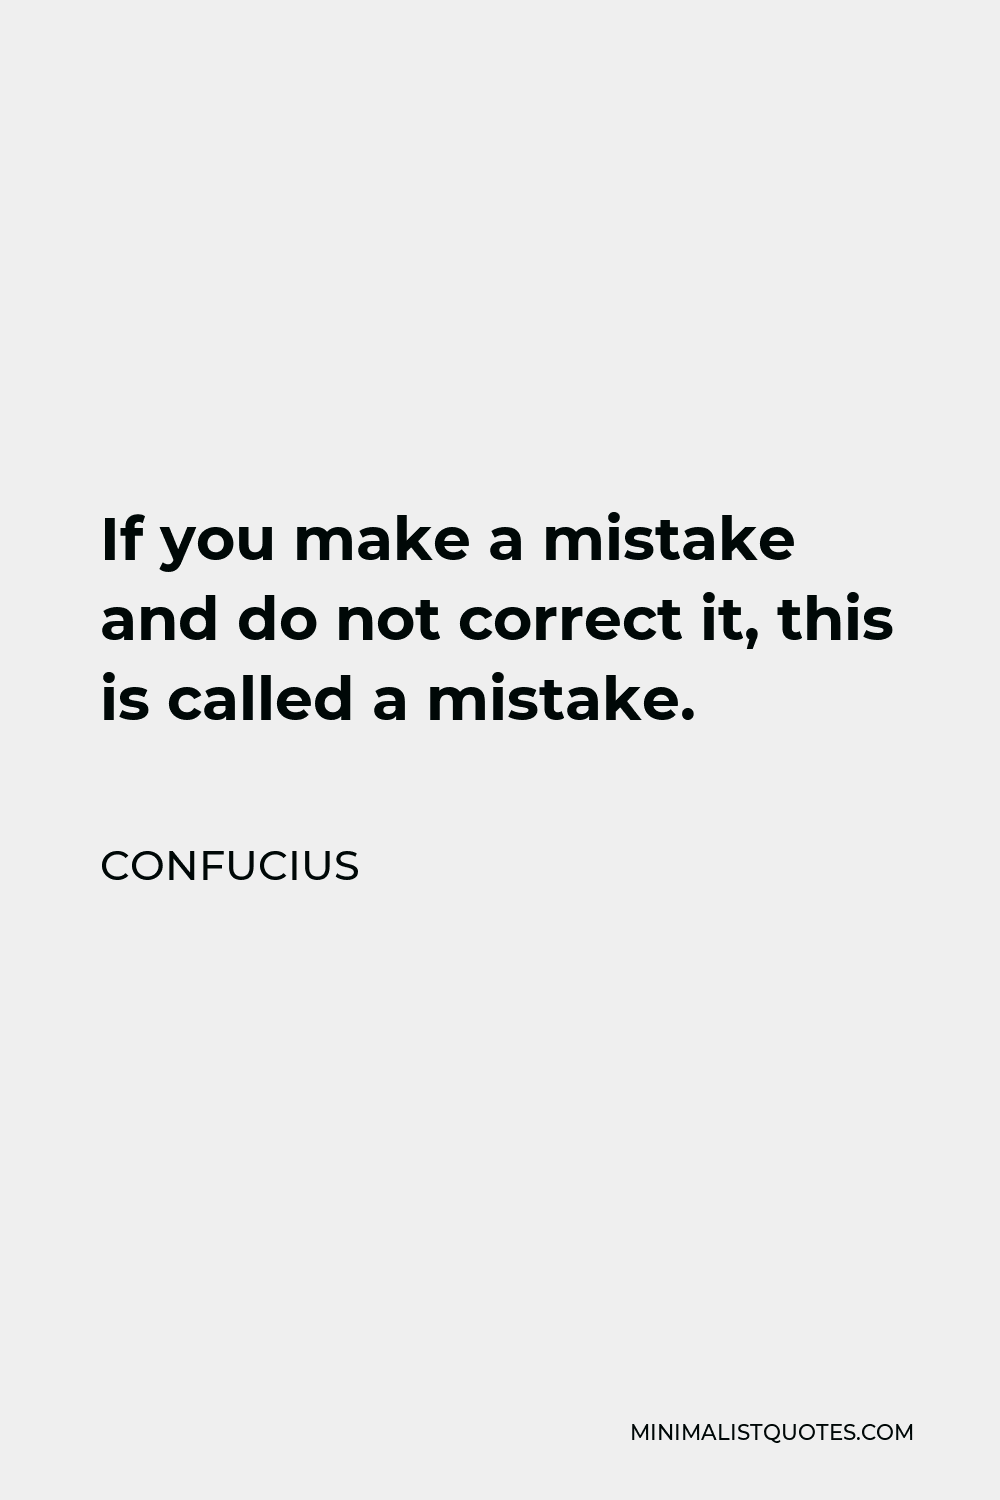 Confucius Quote - If you make a mistake and do not correct it, this is called a mistake.